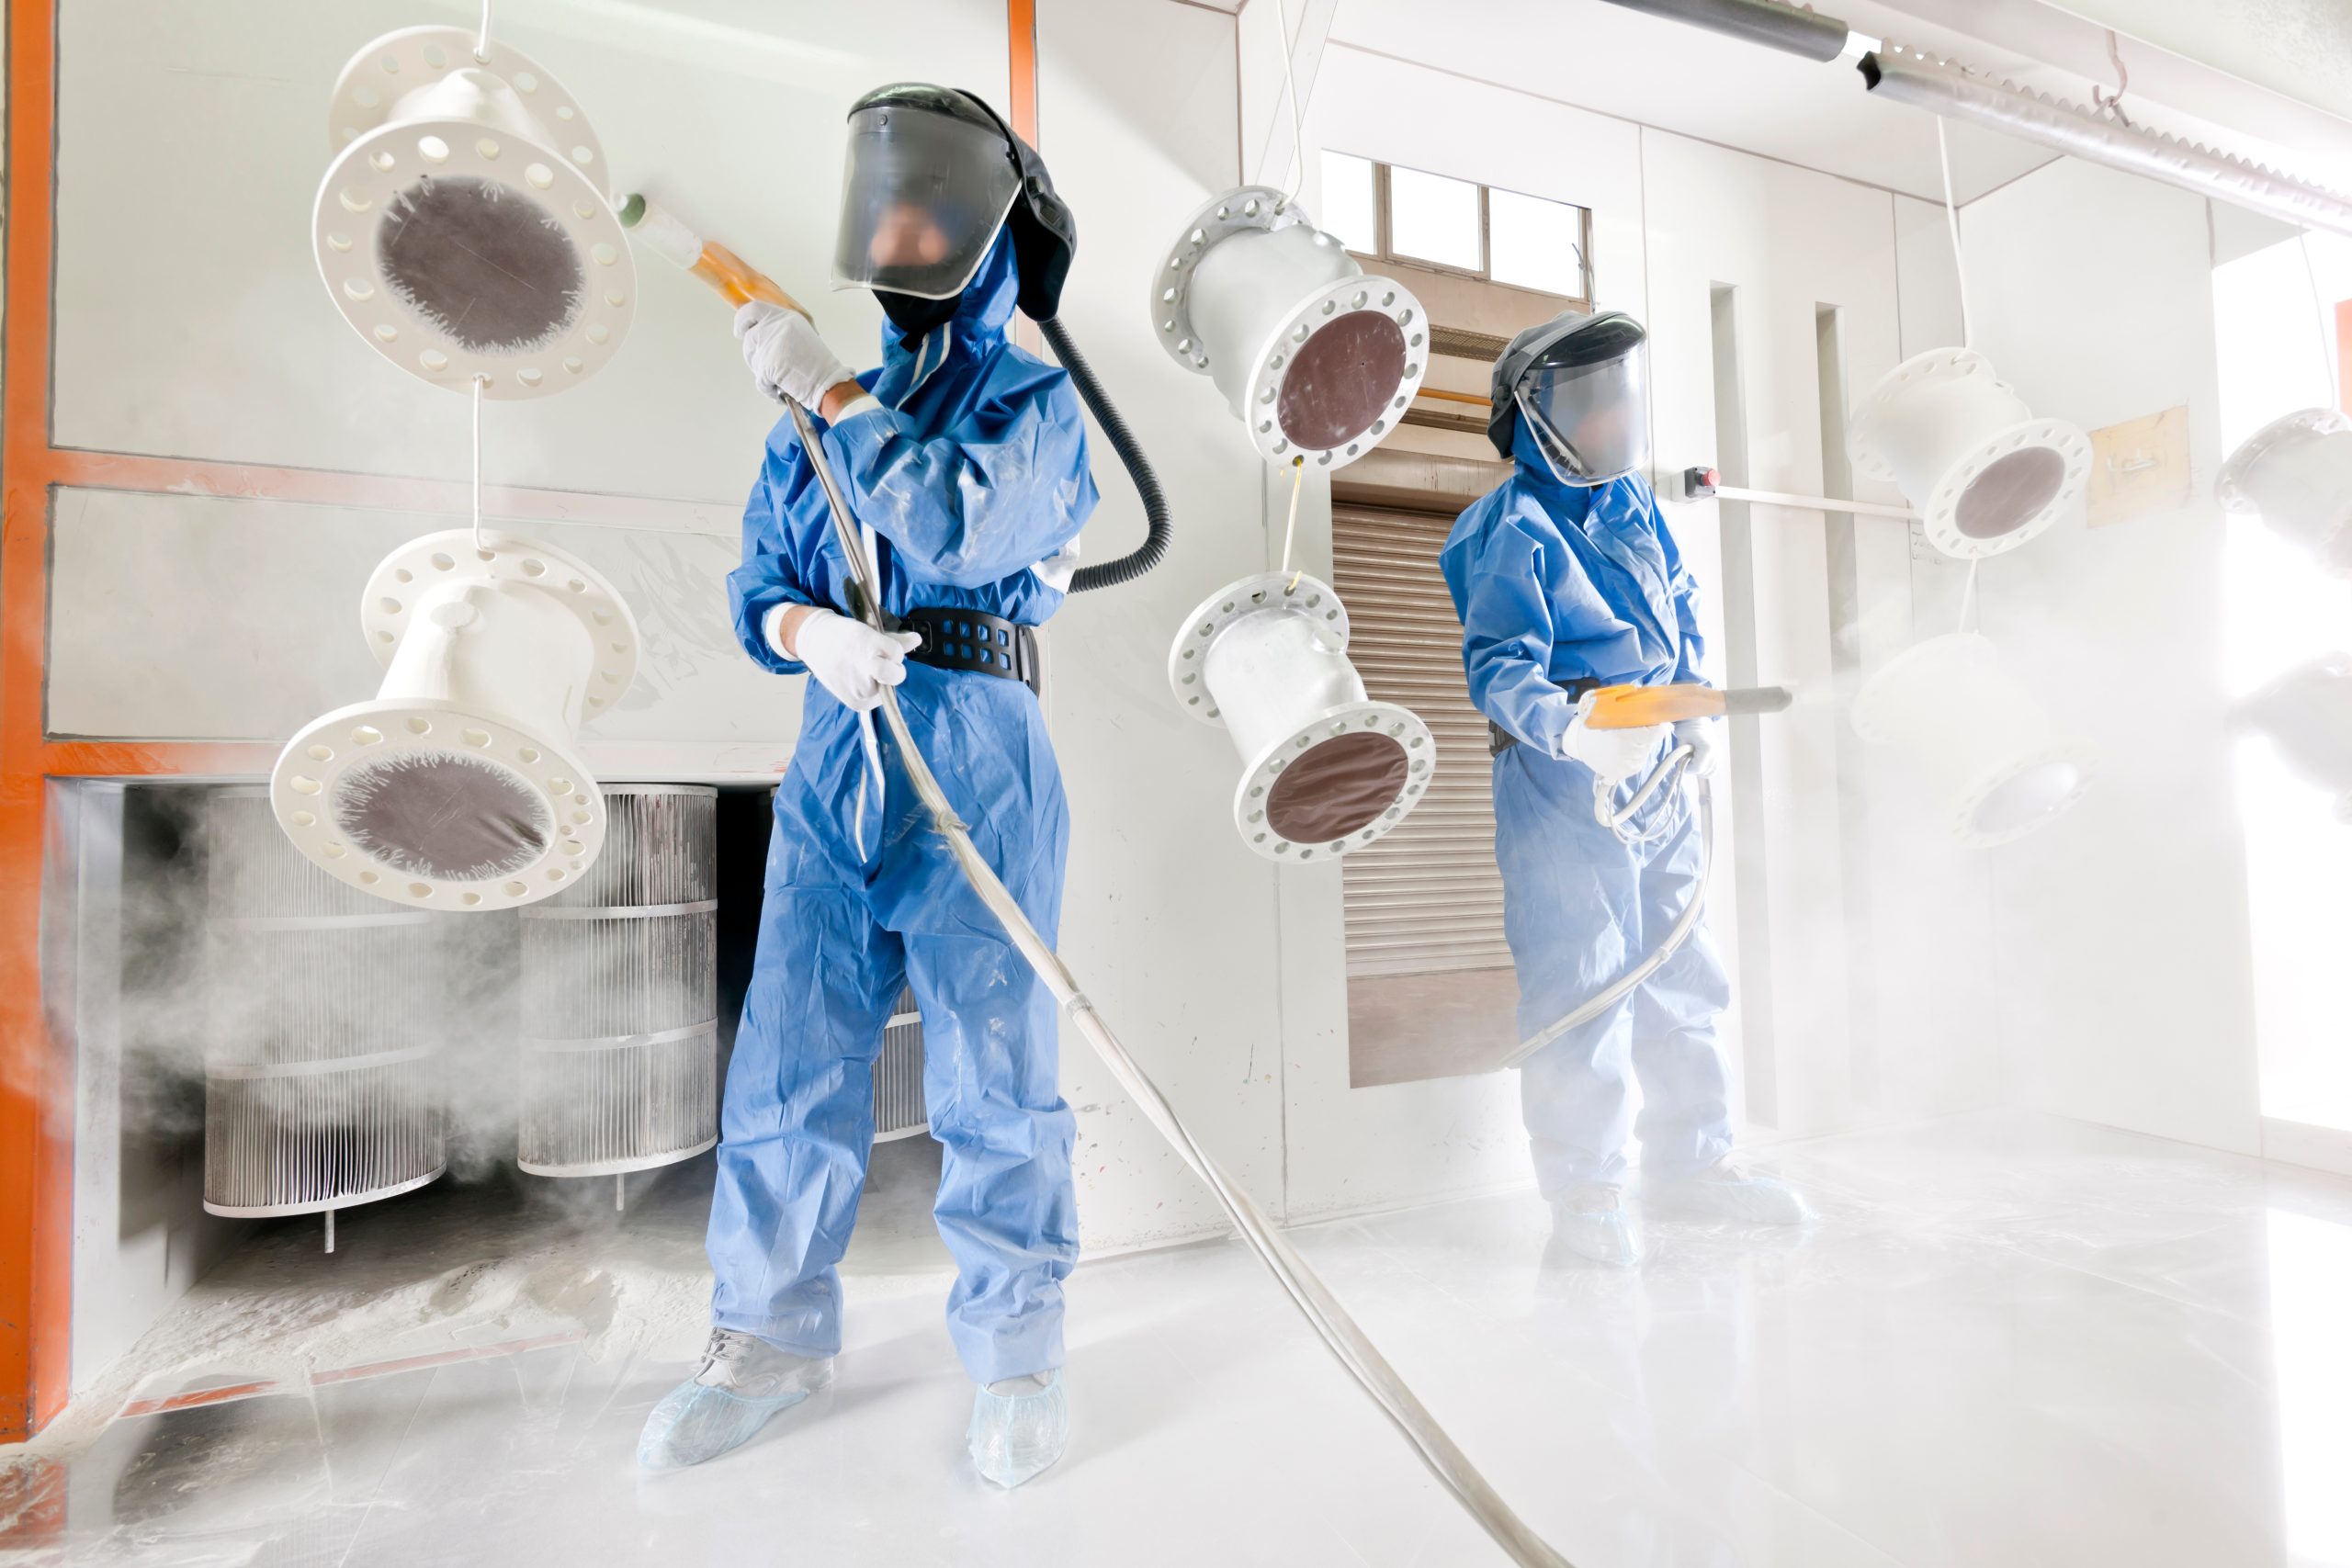 Two men in full paint suits and facemasks spray down tubing with powder-coating materials